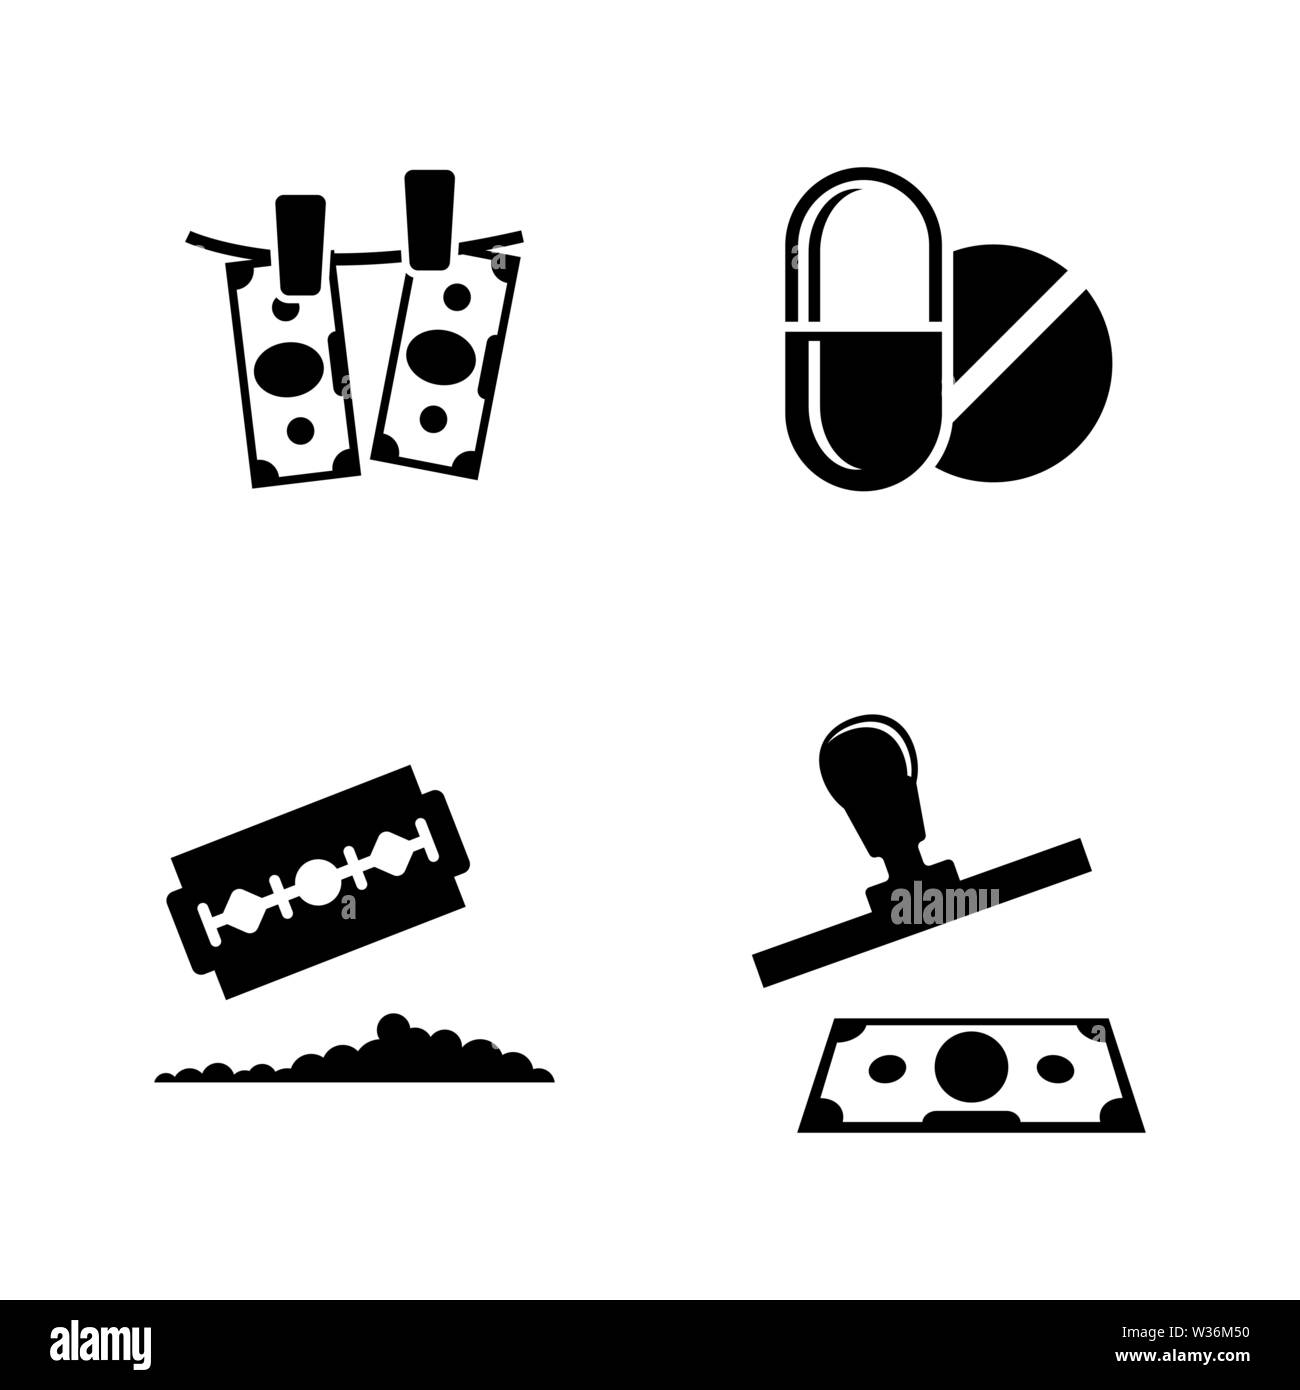 Criminal Business Drug Trafficking. Simple Related Vector Icons Set for Video, Mobile Apps, Web Sites, Print Projects and You Design. Criminal Busines Stock Vector